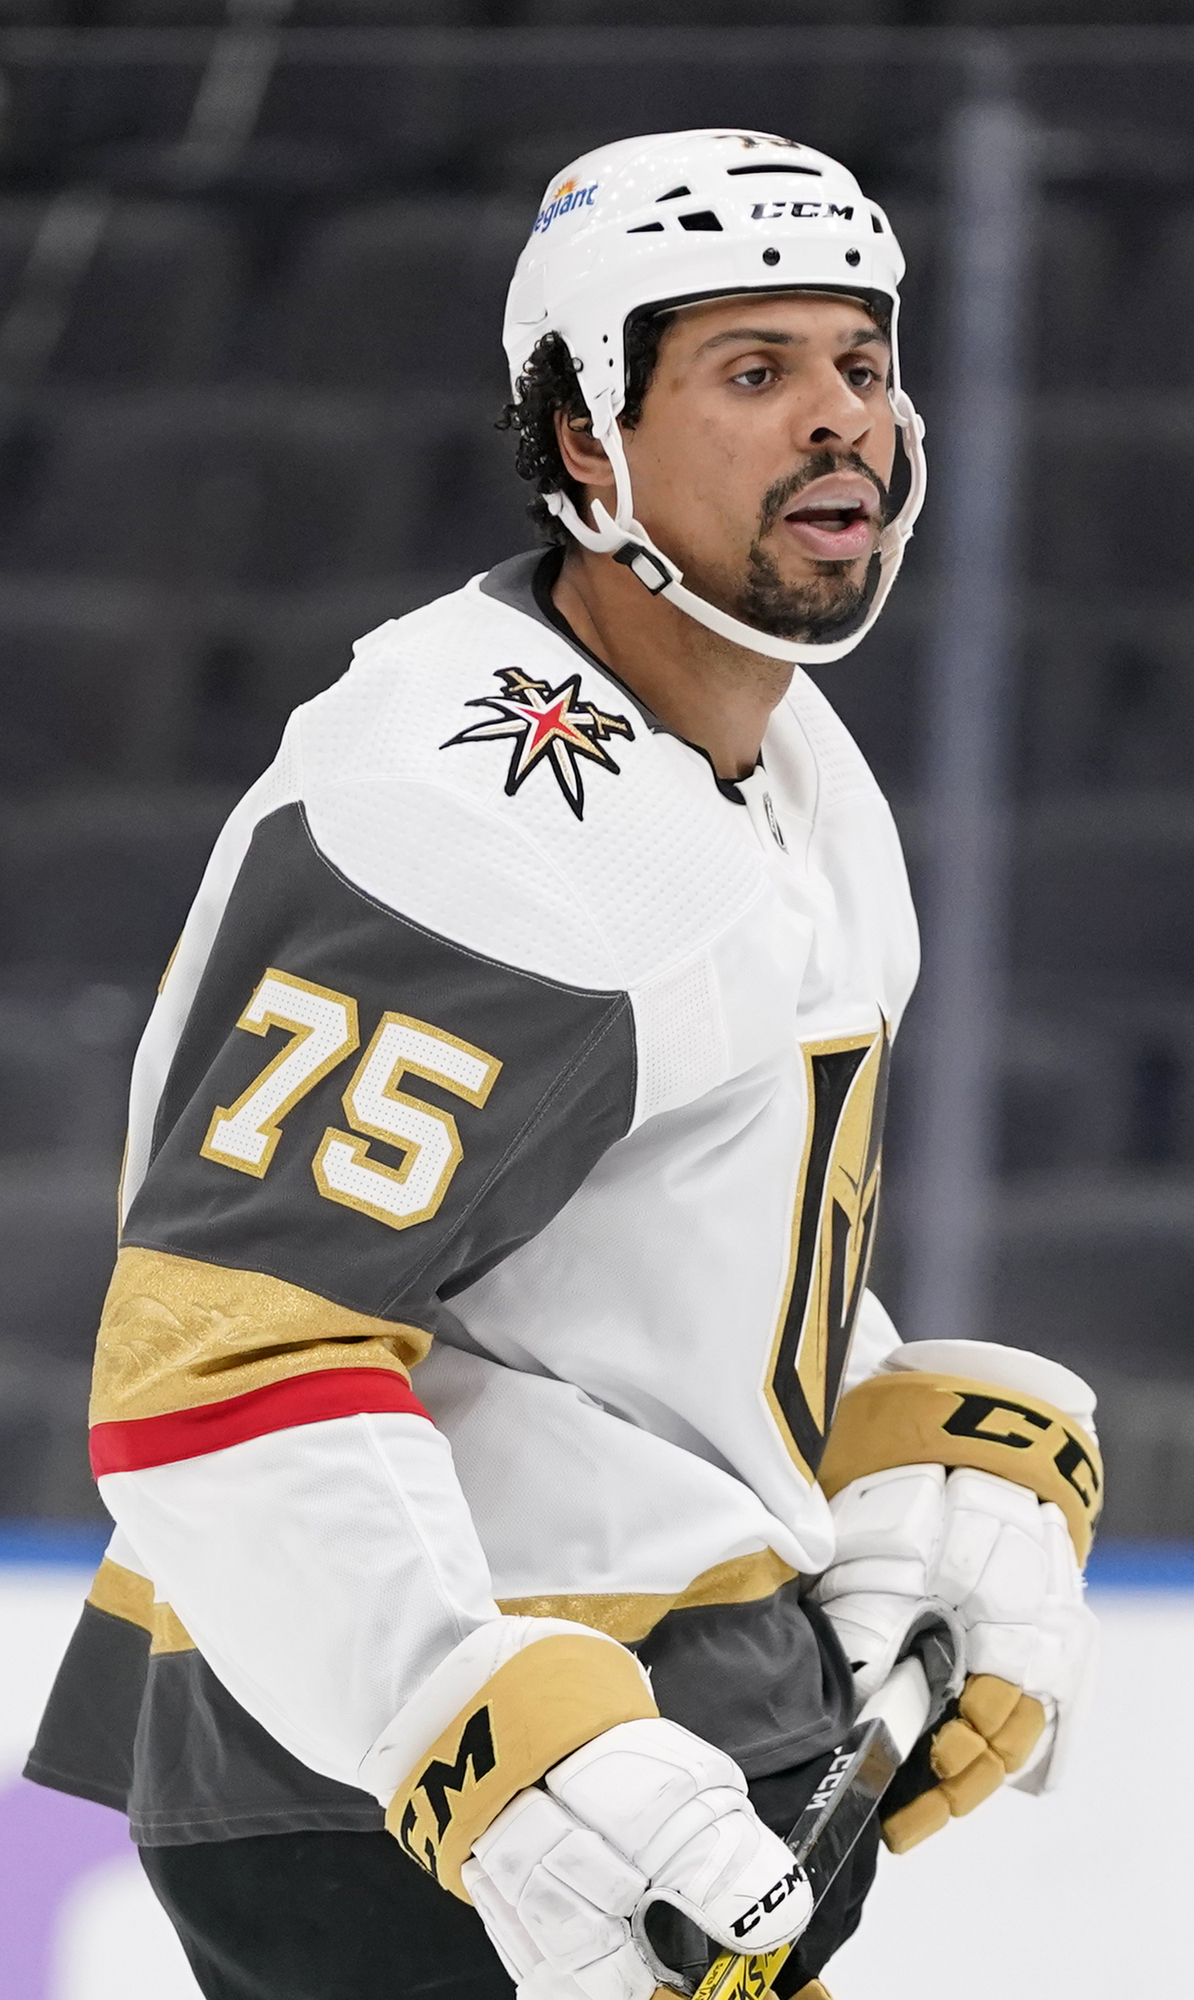 Ryan Reaves has missed more than a month because of injury but might be back for the Golden Knights in the playoffs.